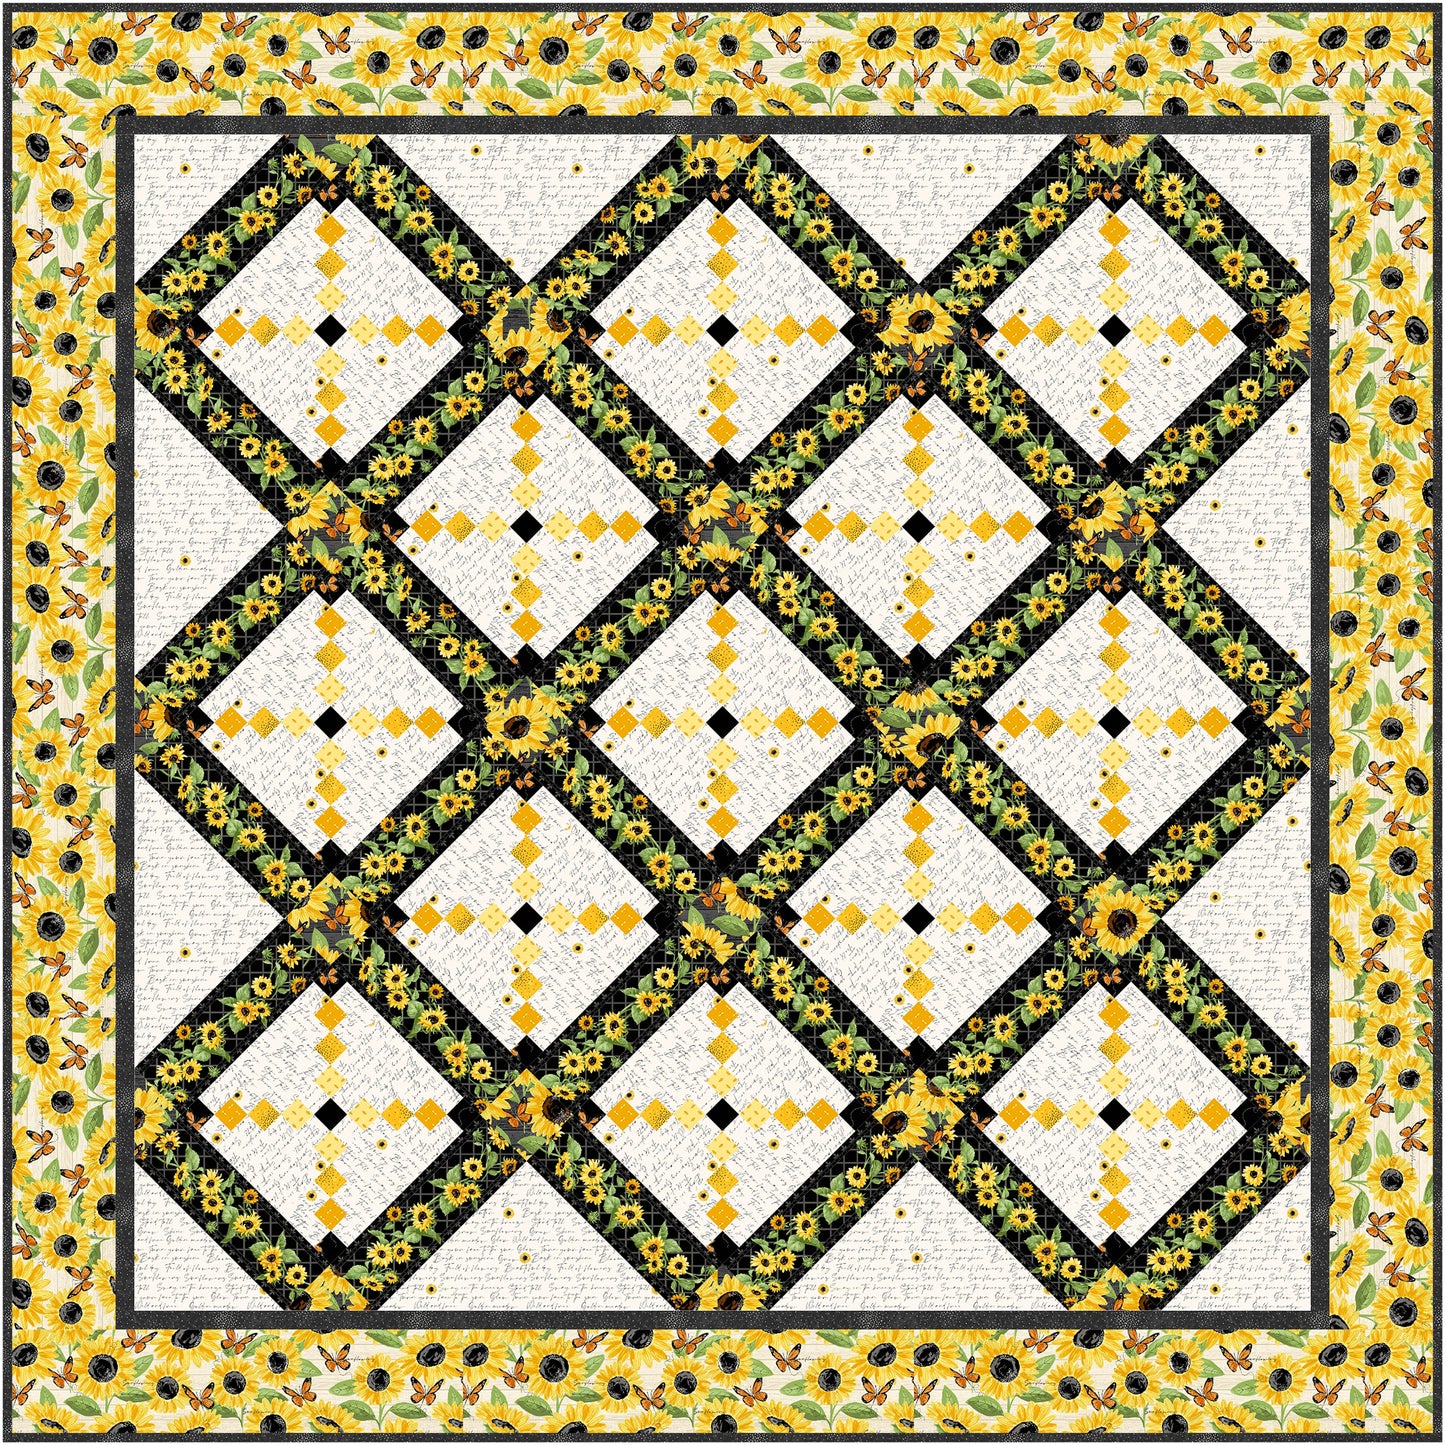 Sunflower Chain Quilt NH-2321e - Downloadable Pattern